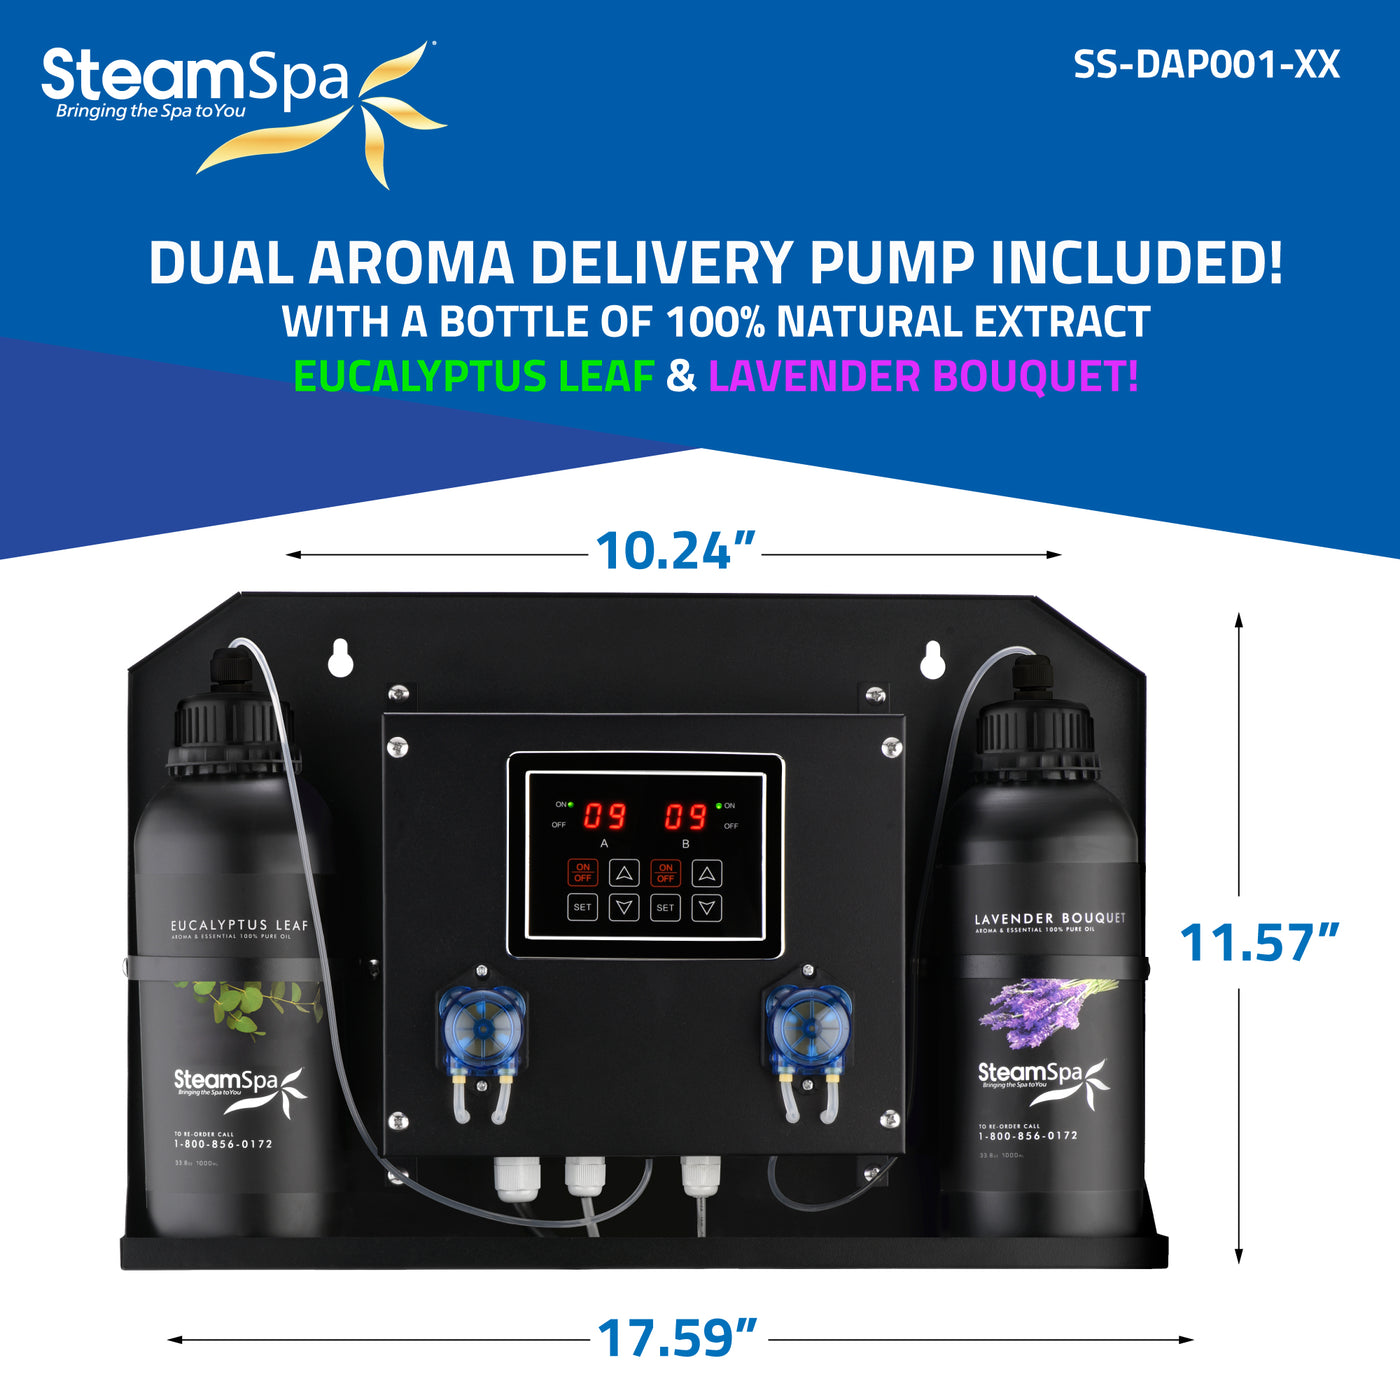 Black Series WiFi and Bluetooth 9kW QuickStart Steam Bath Generator Package with Dual Aroma Pump in Gold BKT900GD-ADP